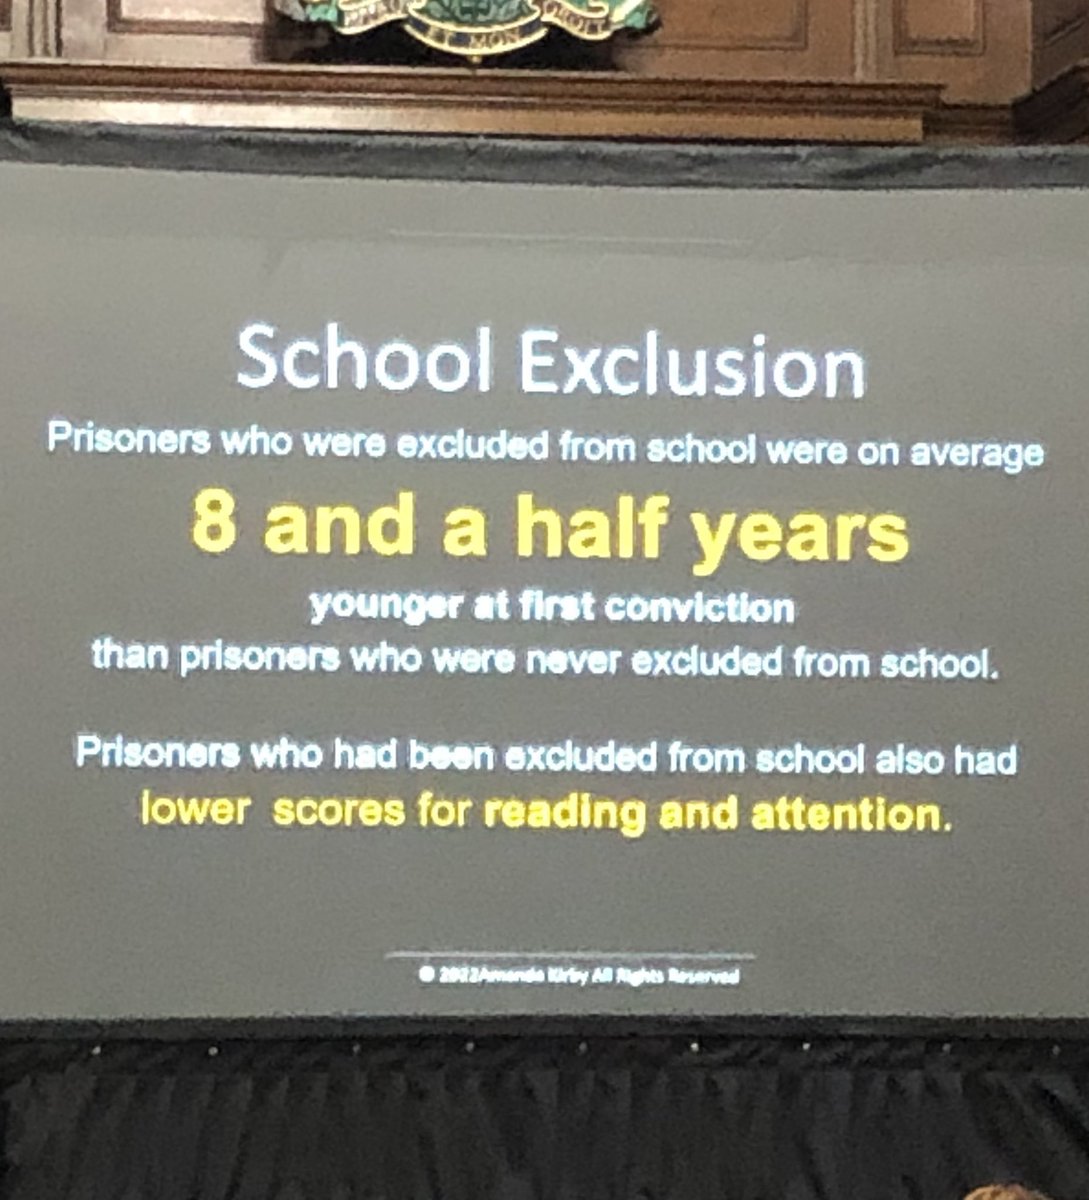 Neurodivergent children are more likely to be excluded from school for “behavioural difficulties”. @profamandakirby highlights that children who are excluded from school are convicted of offences 8.5 earlier that neurotyopical children. 1/2 #NDConference2022 @ADHDFoundation